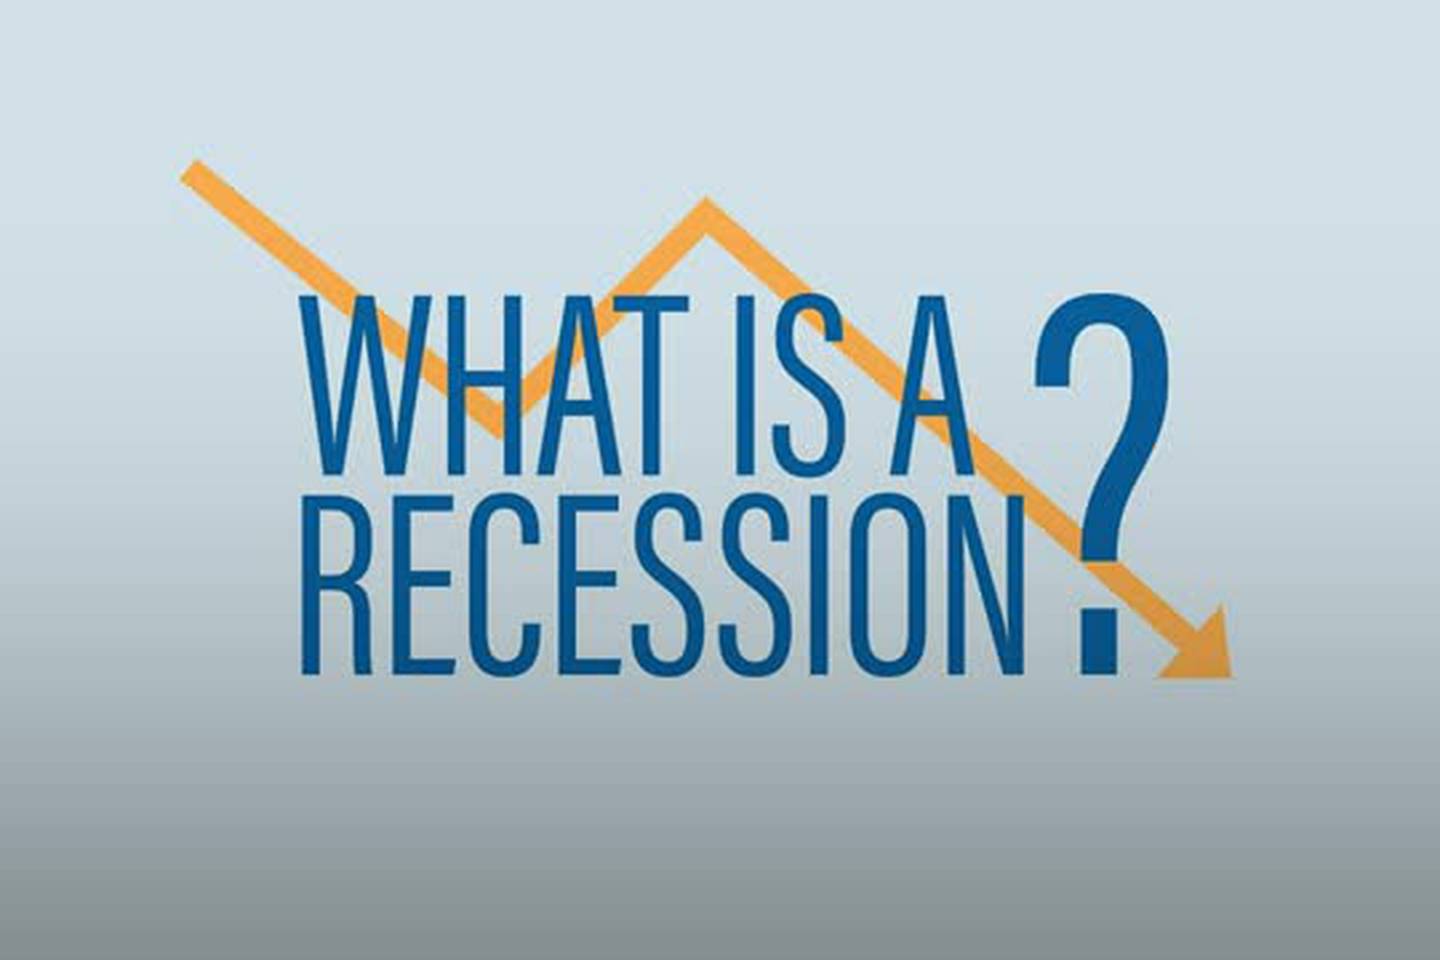 What is a recession?